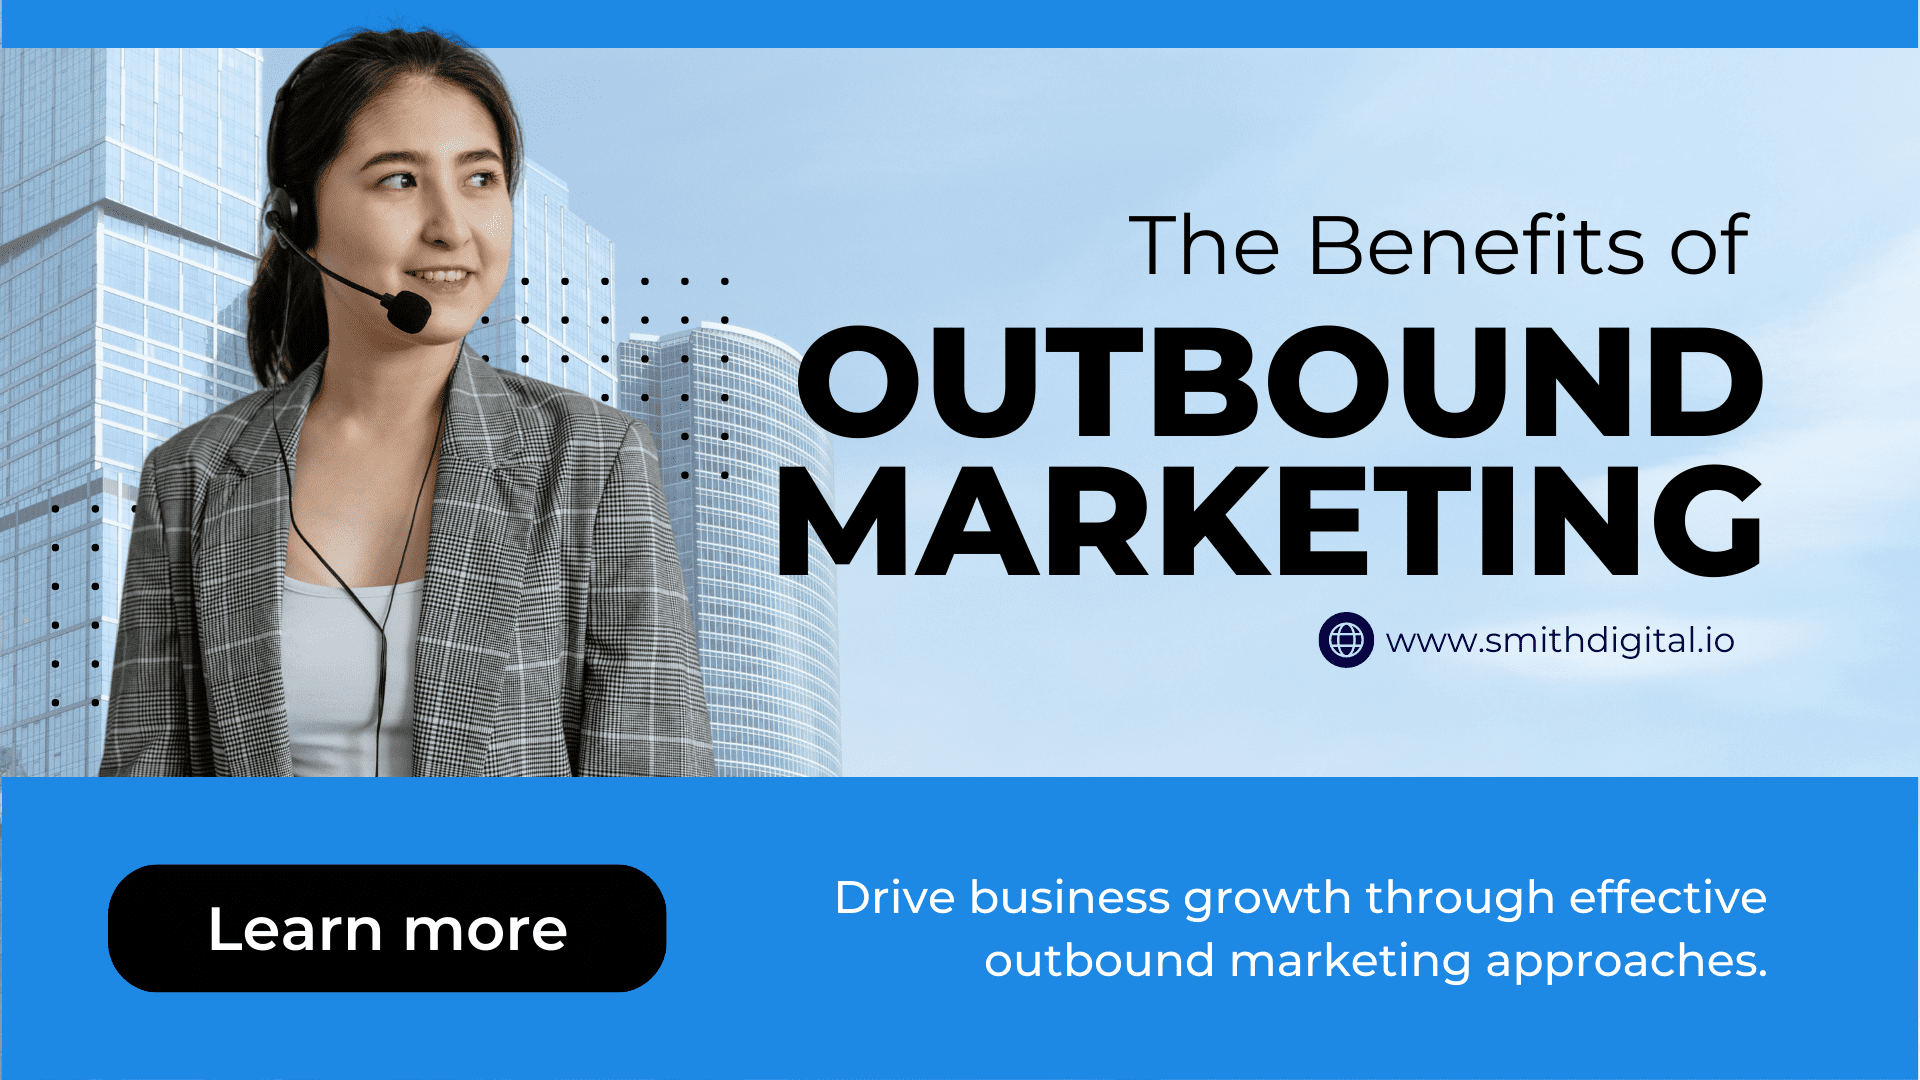 The Benefits of Outbound Marketing for Your Business